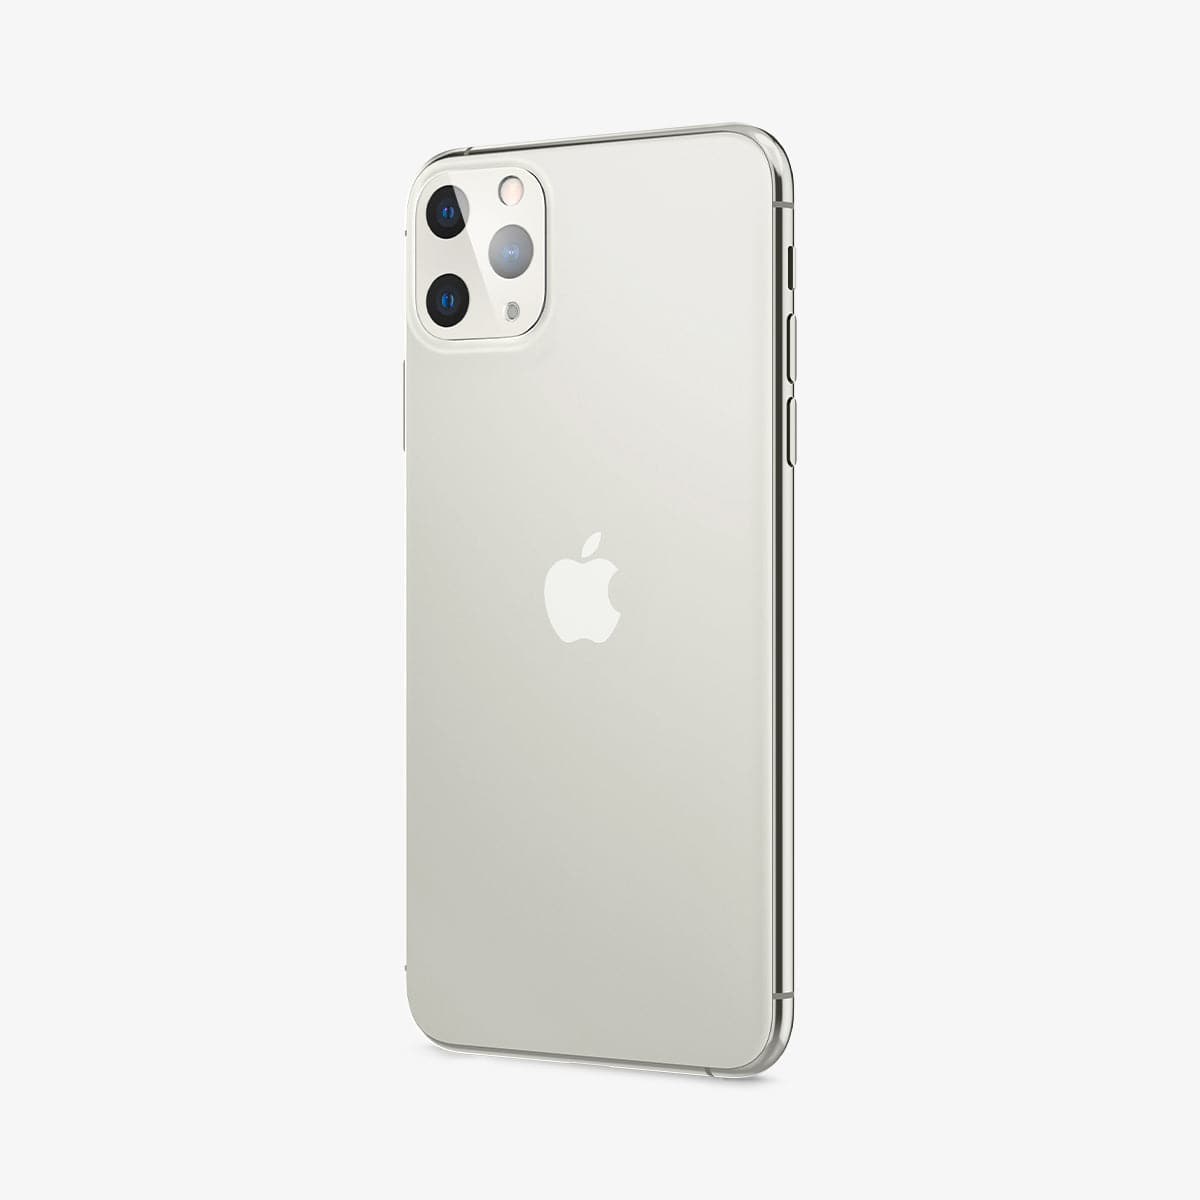 AGL00502 - iPhone 11 Pro / Pro Max Full Cover Lens Protector in silver showing the front and partial side installed on device